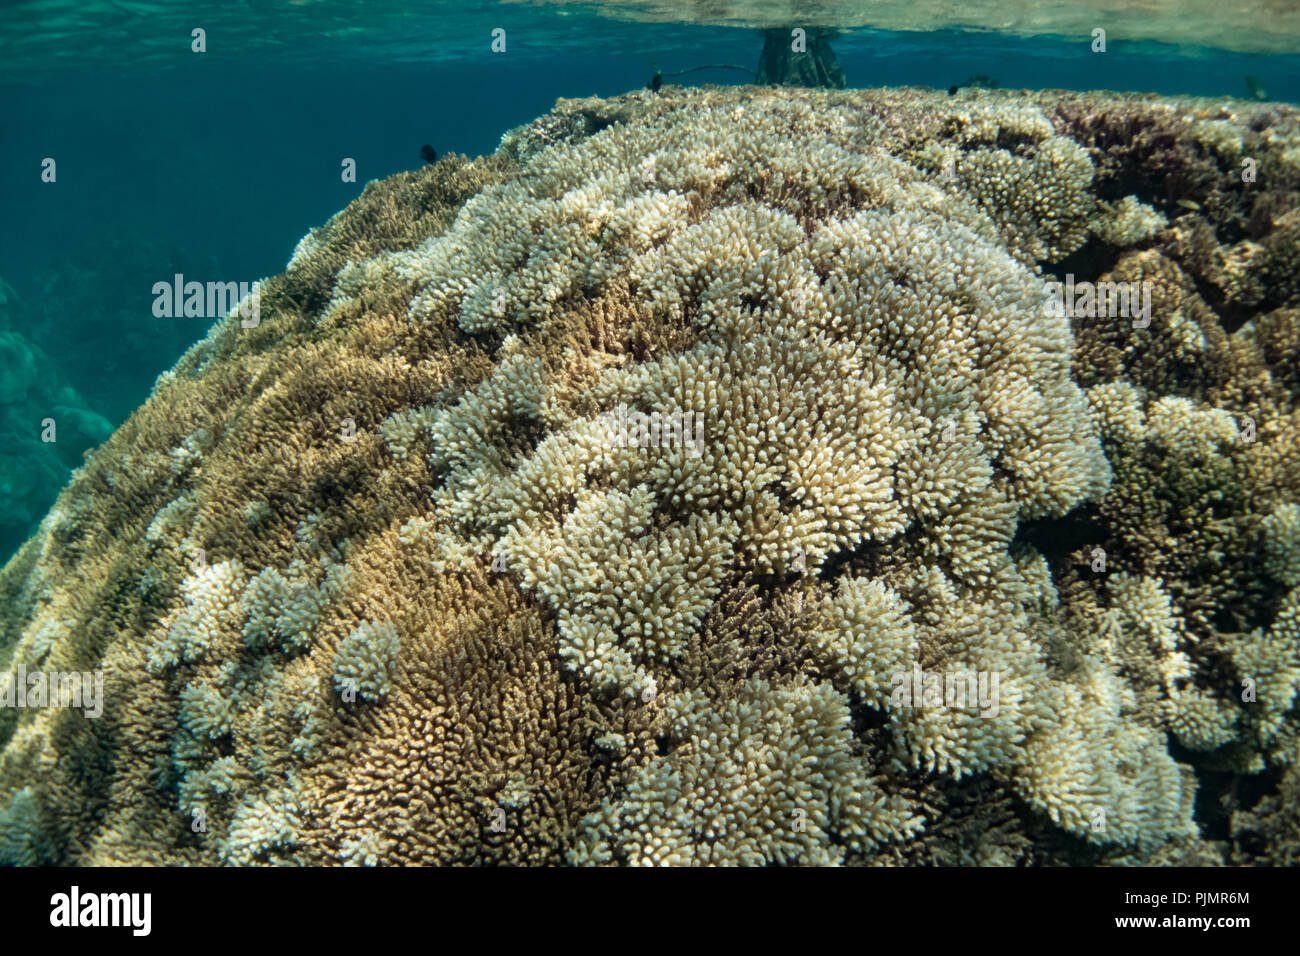 Snorkeling in the inner lagoon at Millennium atoll, showing the dead coral and Tridacna clams due to climate change and coral bleaching. Stock Photo